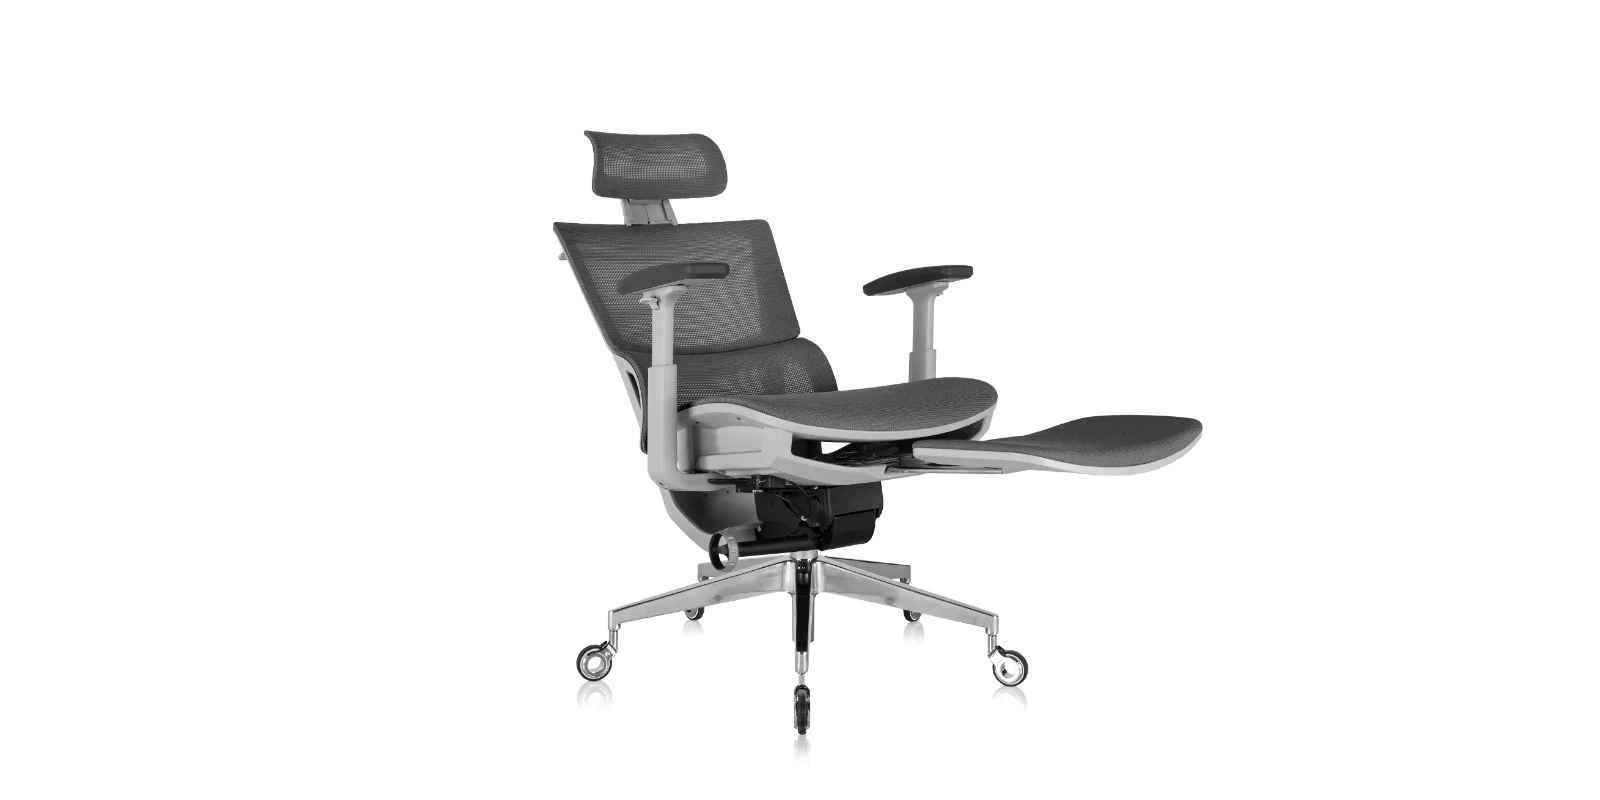 What are the benefits to using a ball chair?